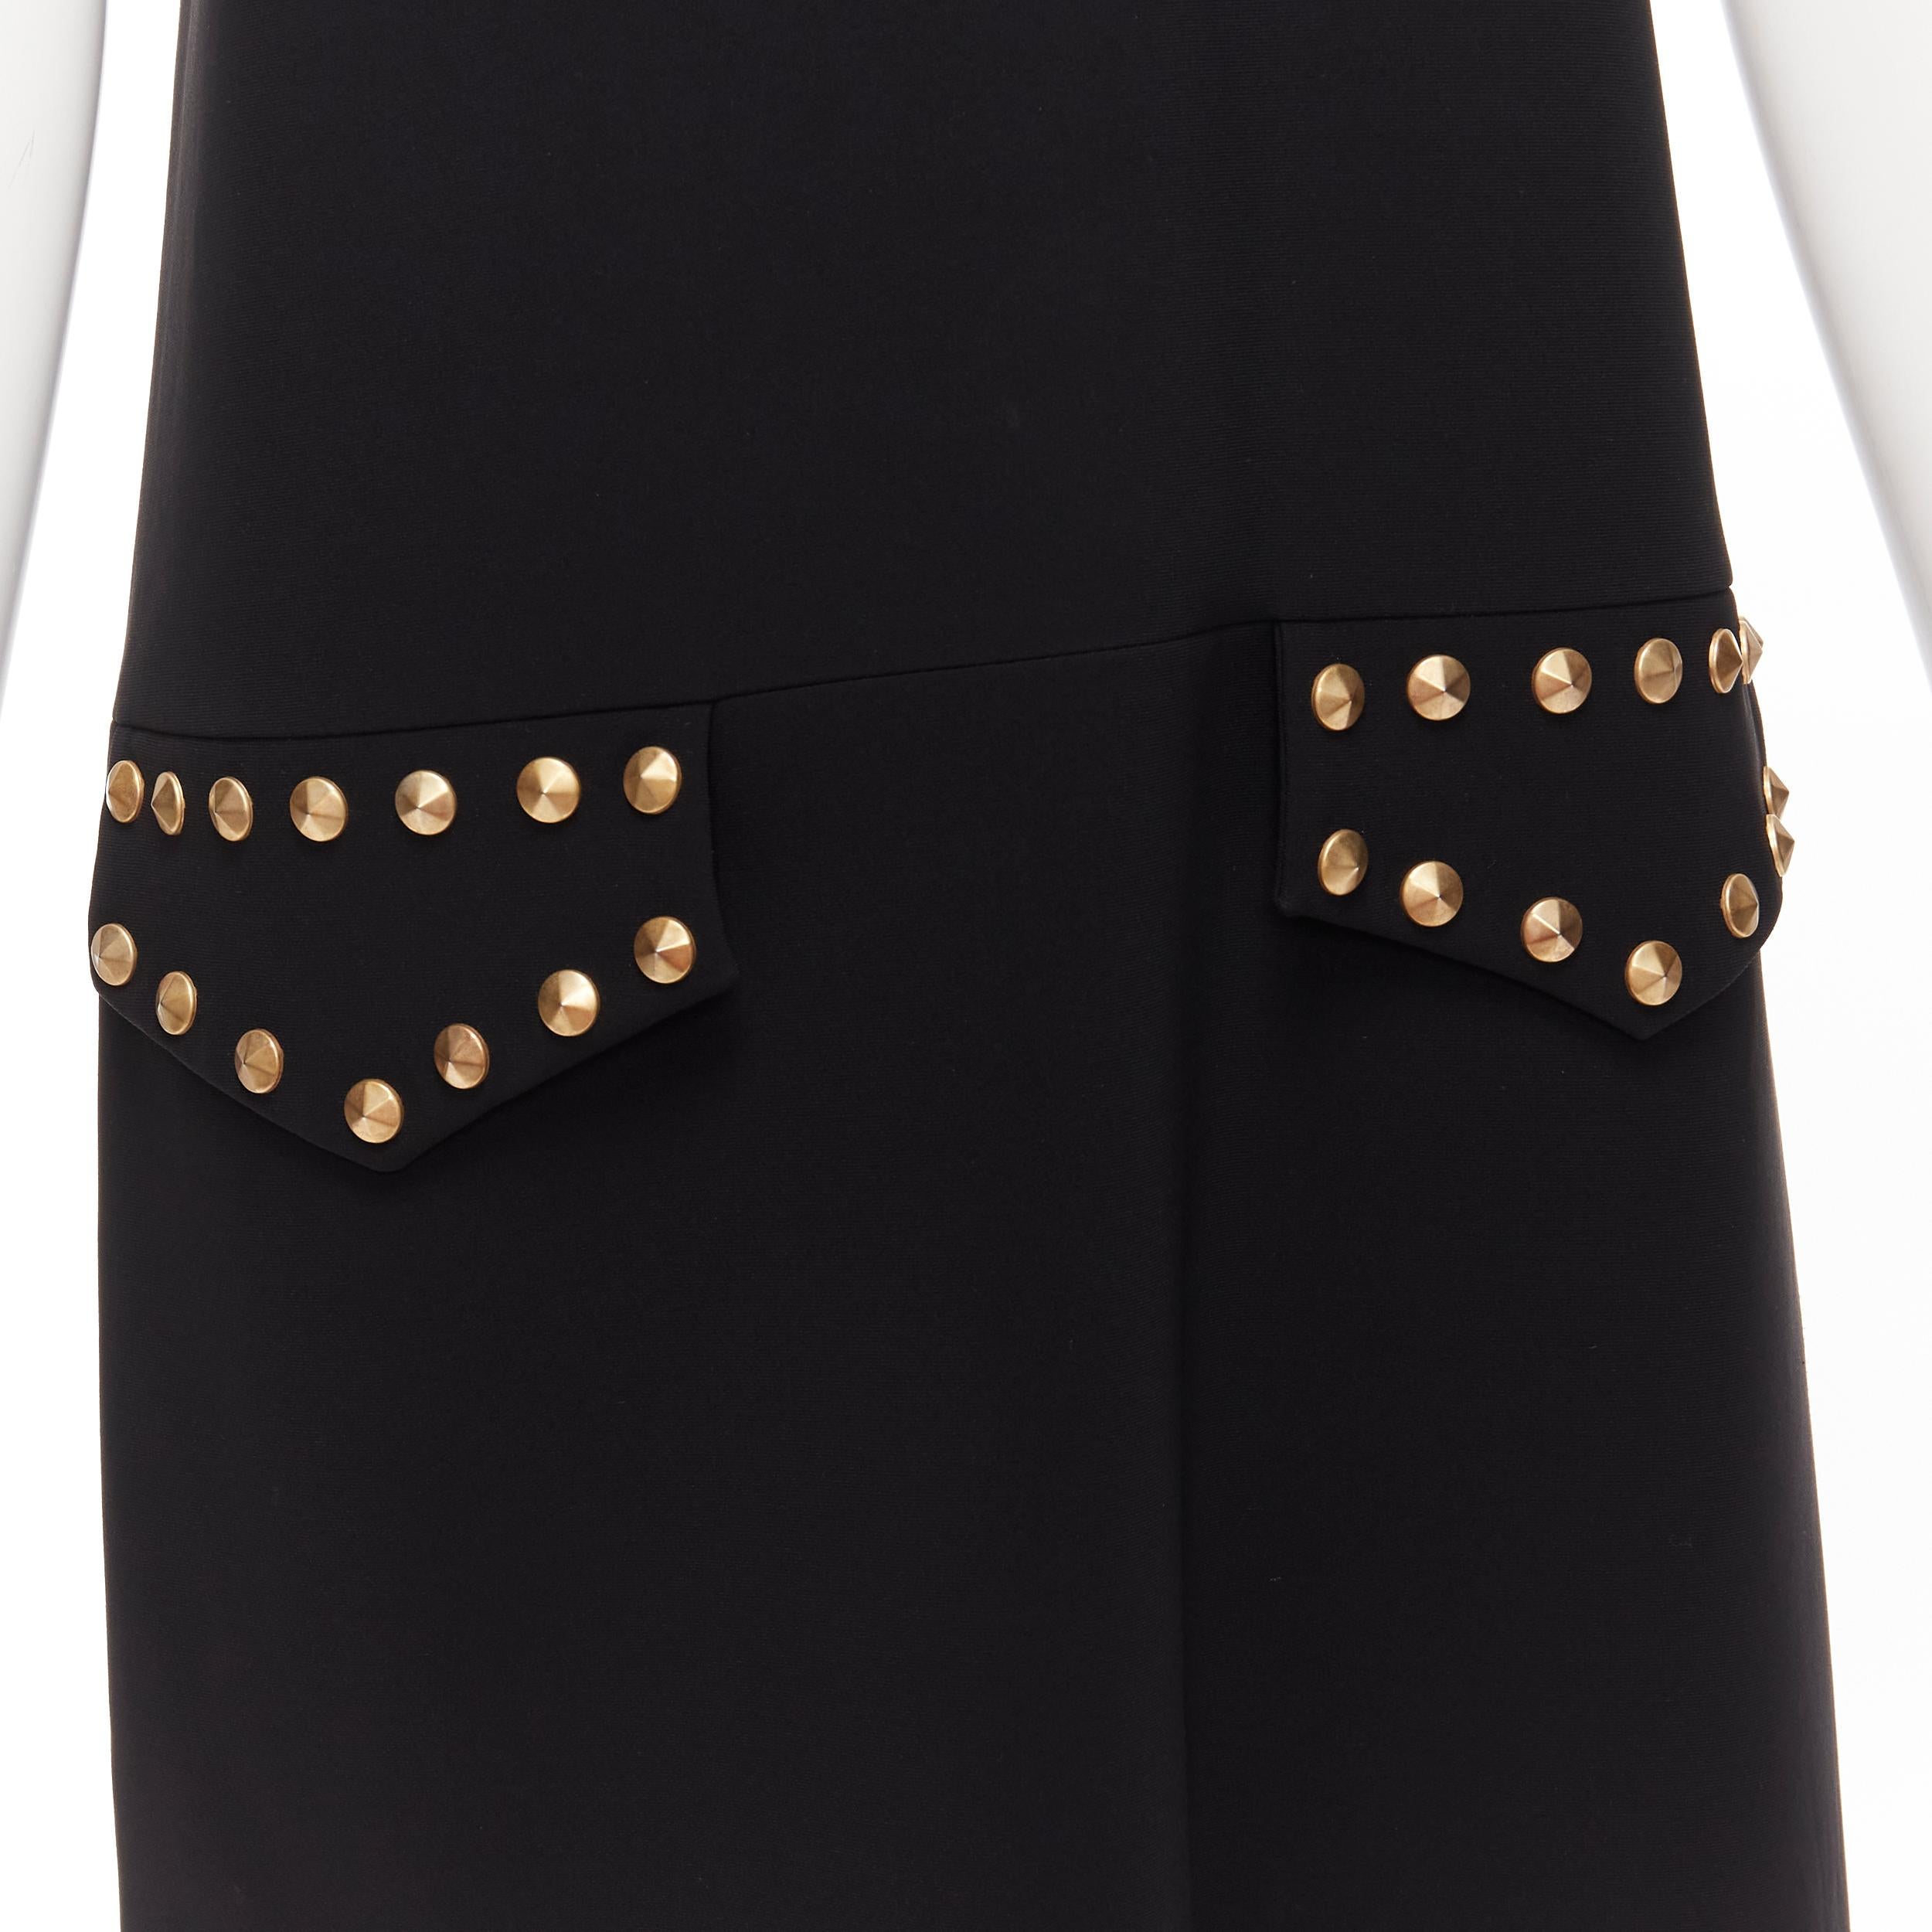 MOSCHINO black gold studded pocket flaps sleeveless dress IT40 S
Reference: CC/A00391
Brand: Moschino
Designer: Jeremy Scott
Material: Triacetate, Blend
Color: Black, Gold
Pattern: Solid
Closure: Zip
Lining: Black Fabric
Made in: